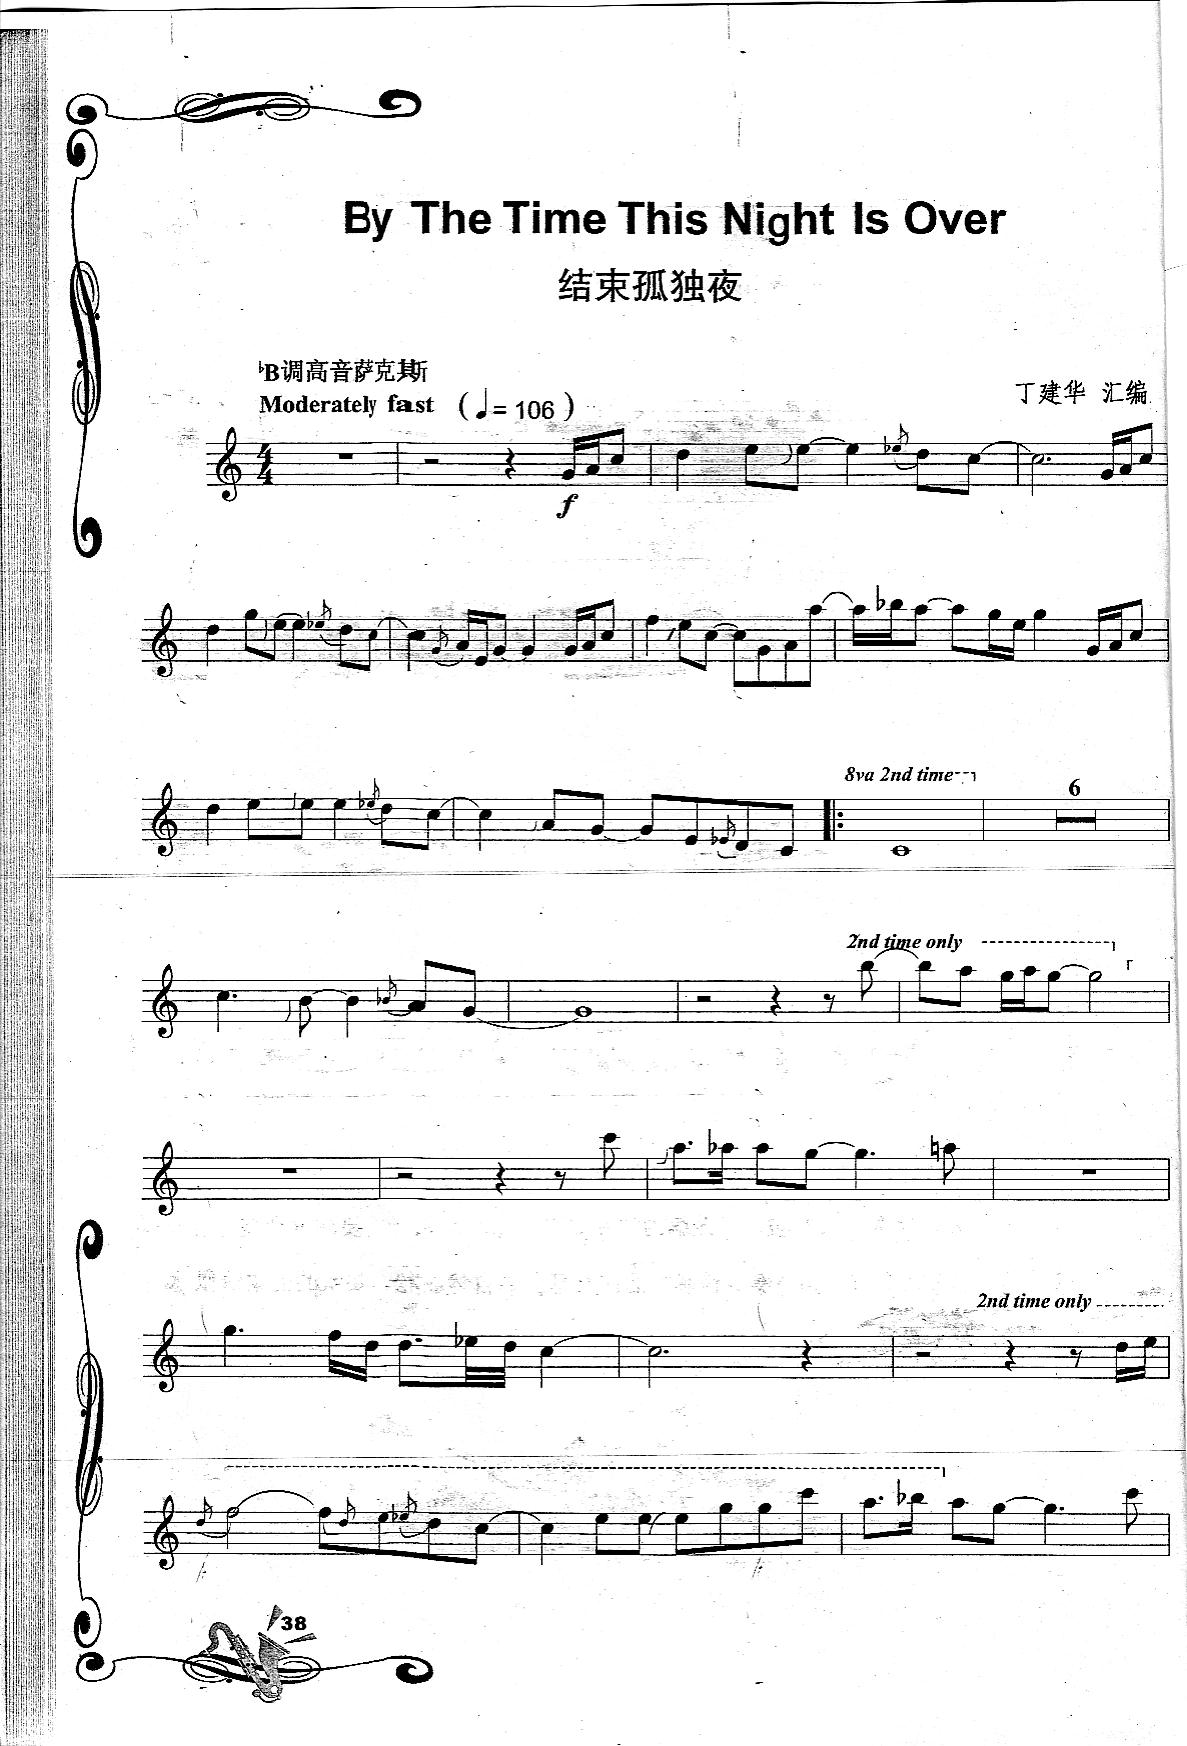 By The Time This Night Is Over 结束孤独夜萨克斯曲谱（图1）